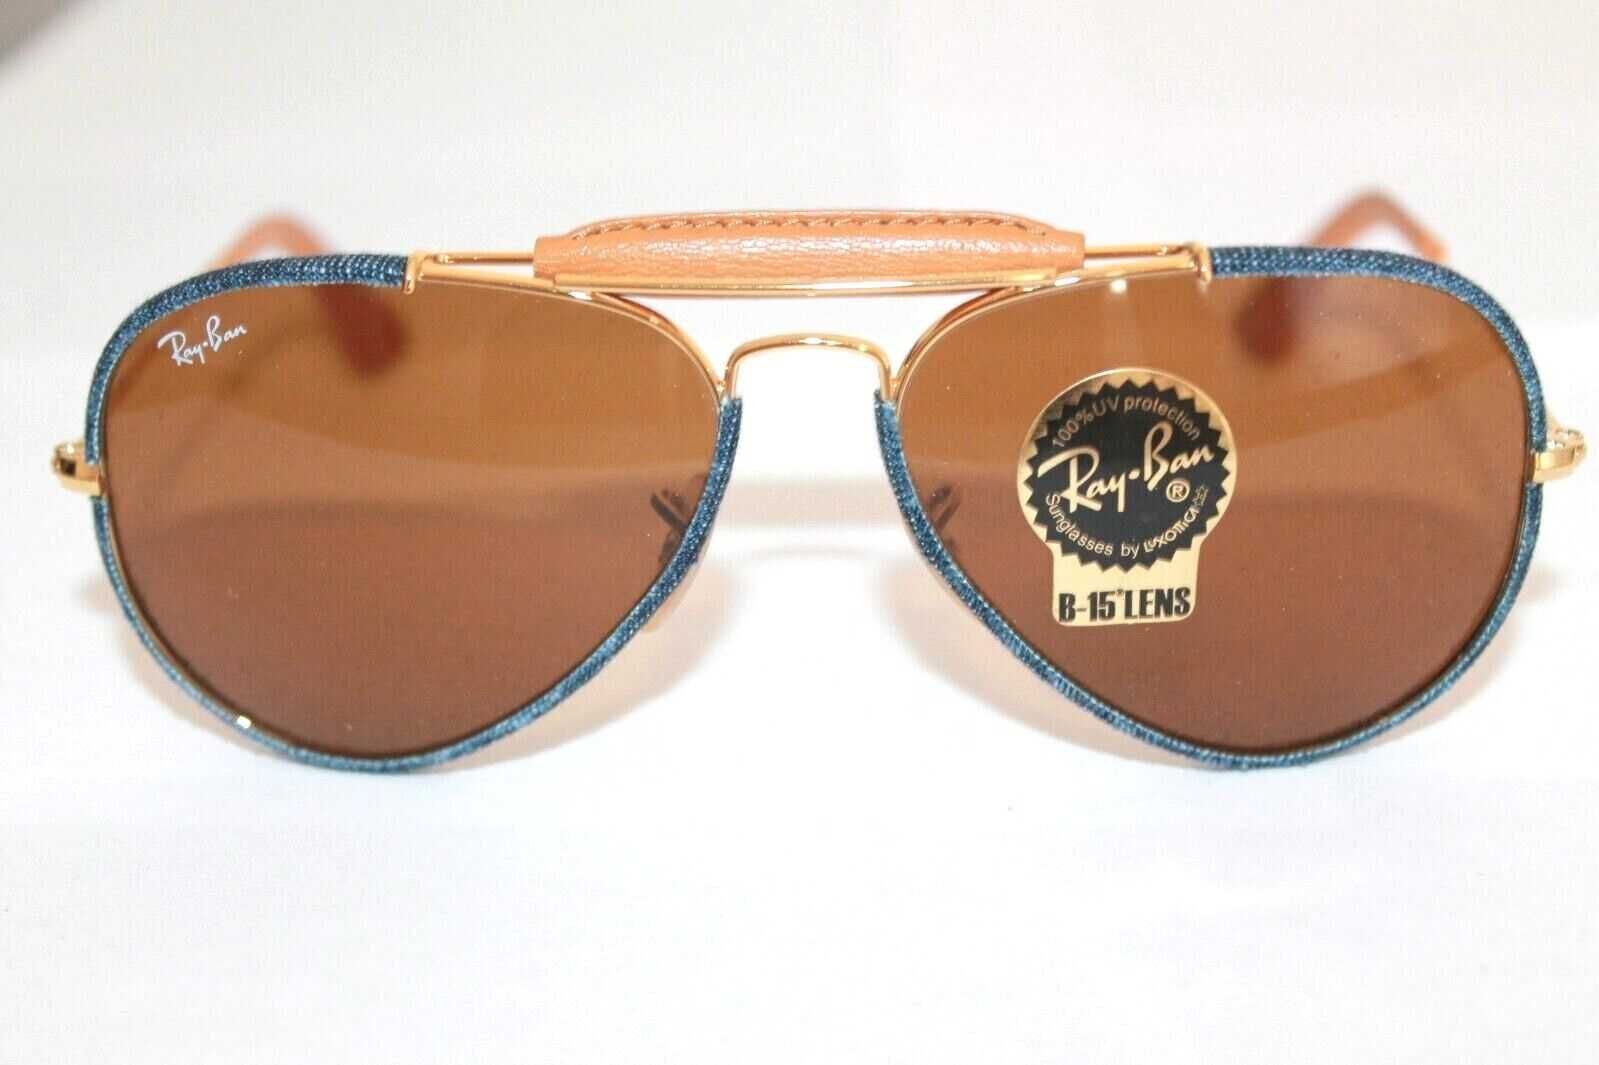 RAY-BAN Aviator Craft blue jeans